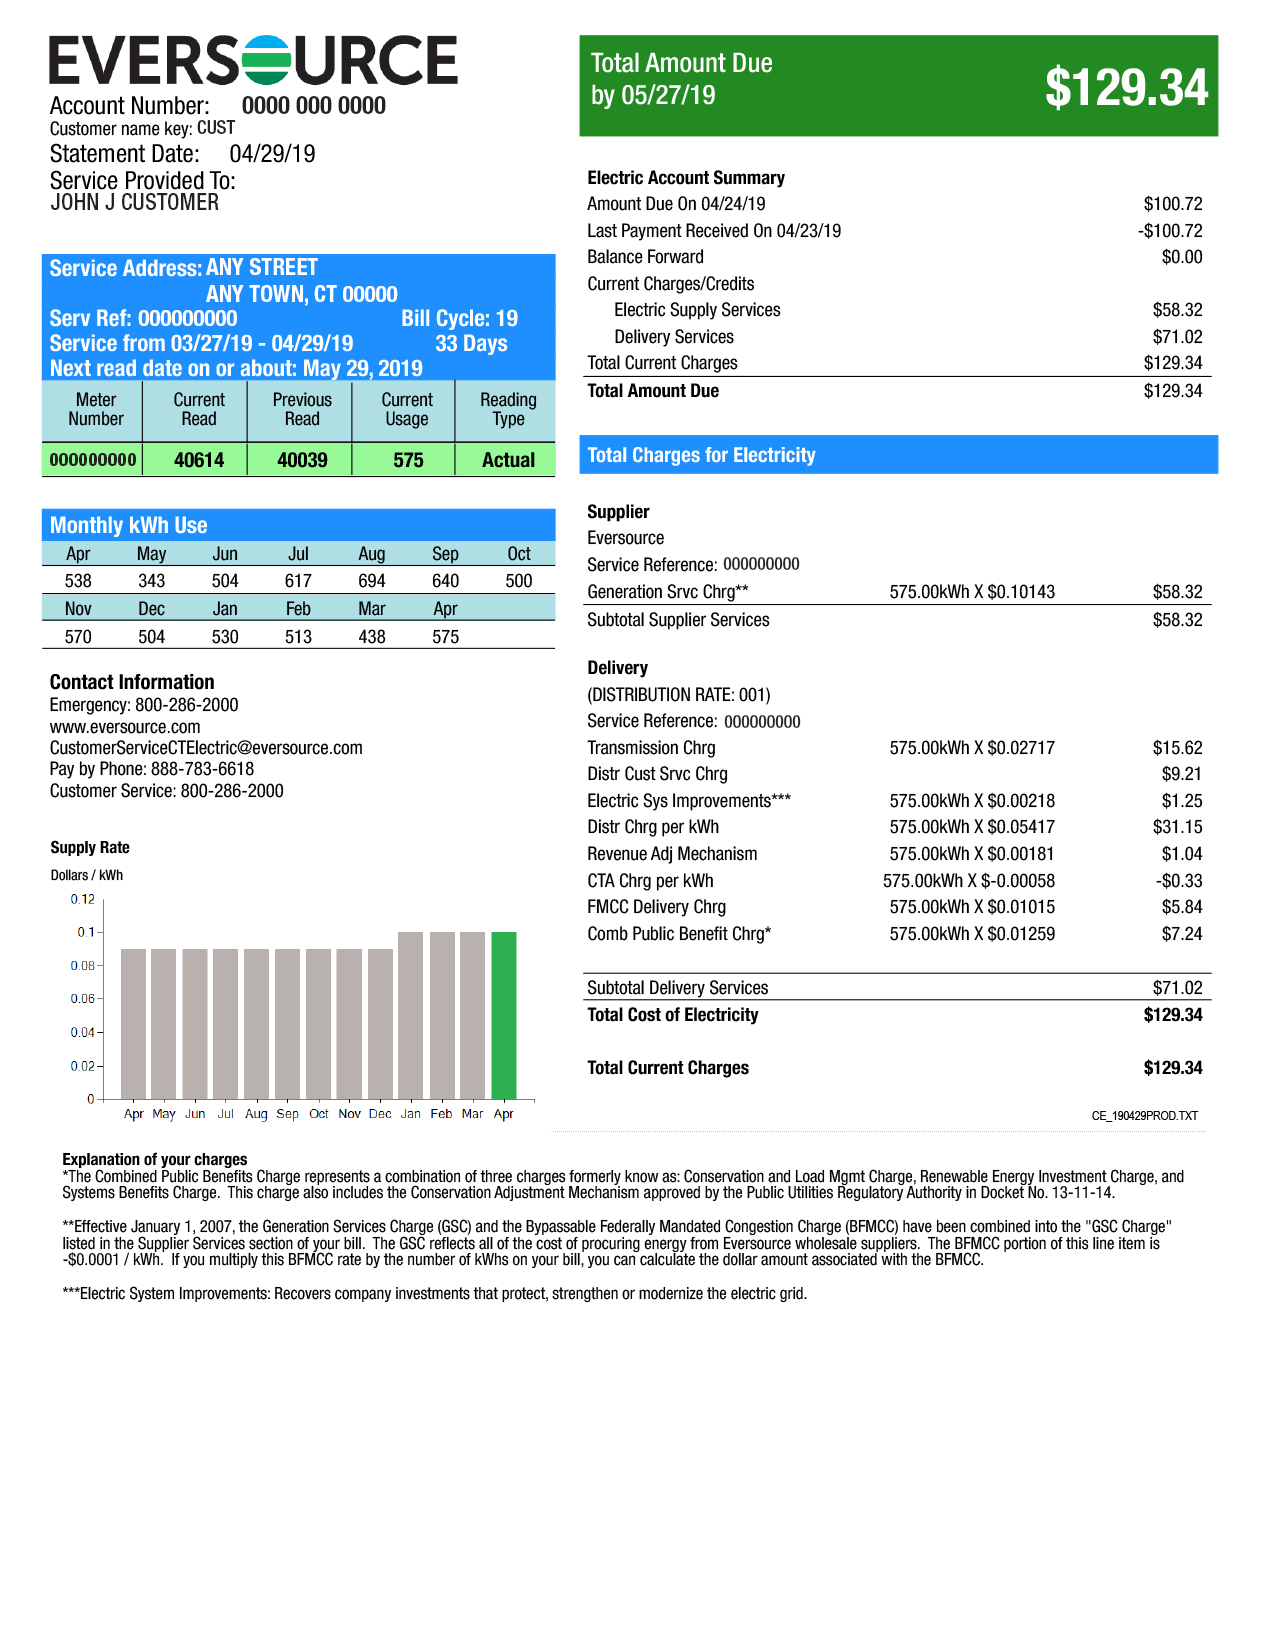 Sample second page of an Eversource electric bill